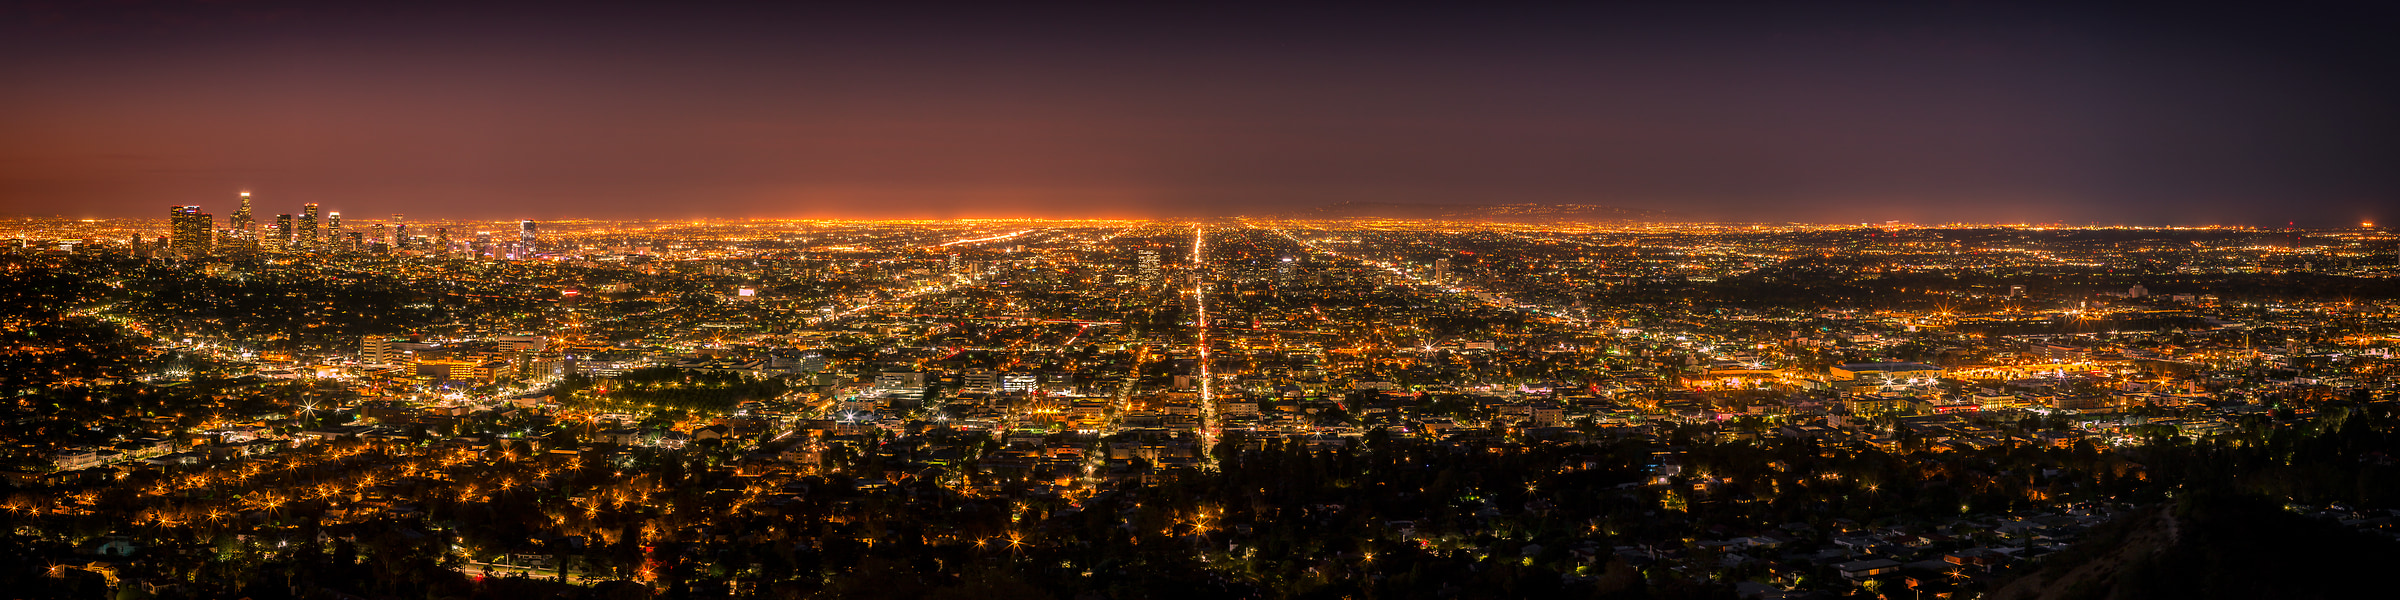 114 megapixels! A very high resolution, large-format VAST photo print of the Los Angeles and Hollywood skyline in California at sunrise and sunset; landscape photo created by cityscape photographer Guido Brandt.